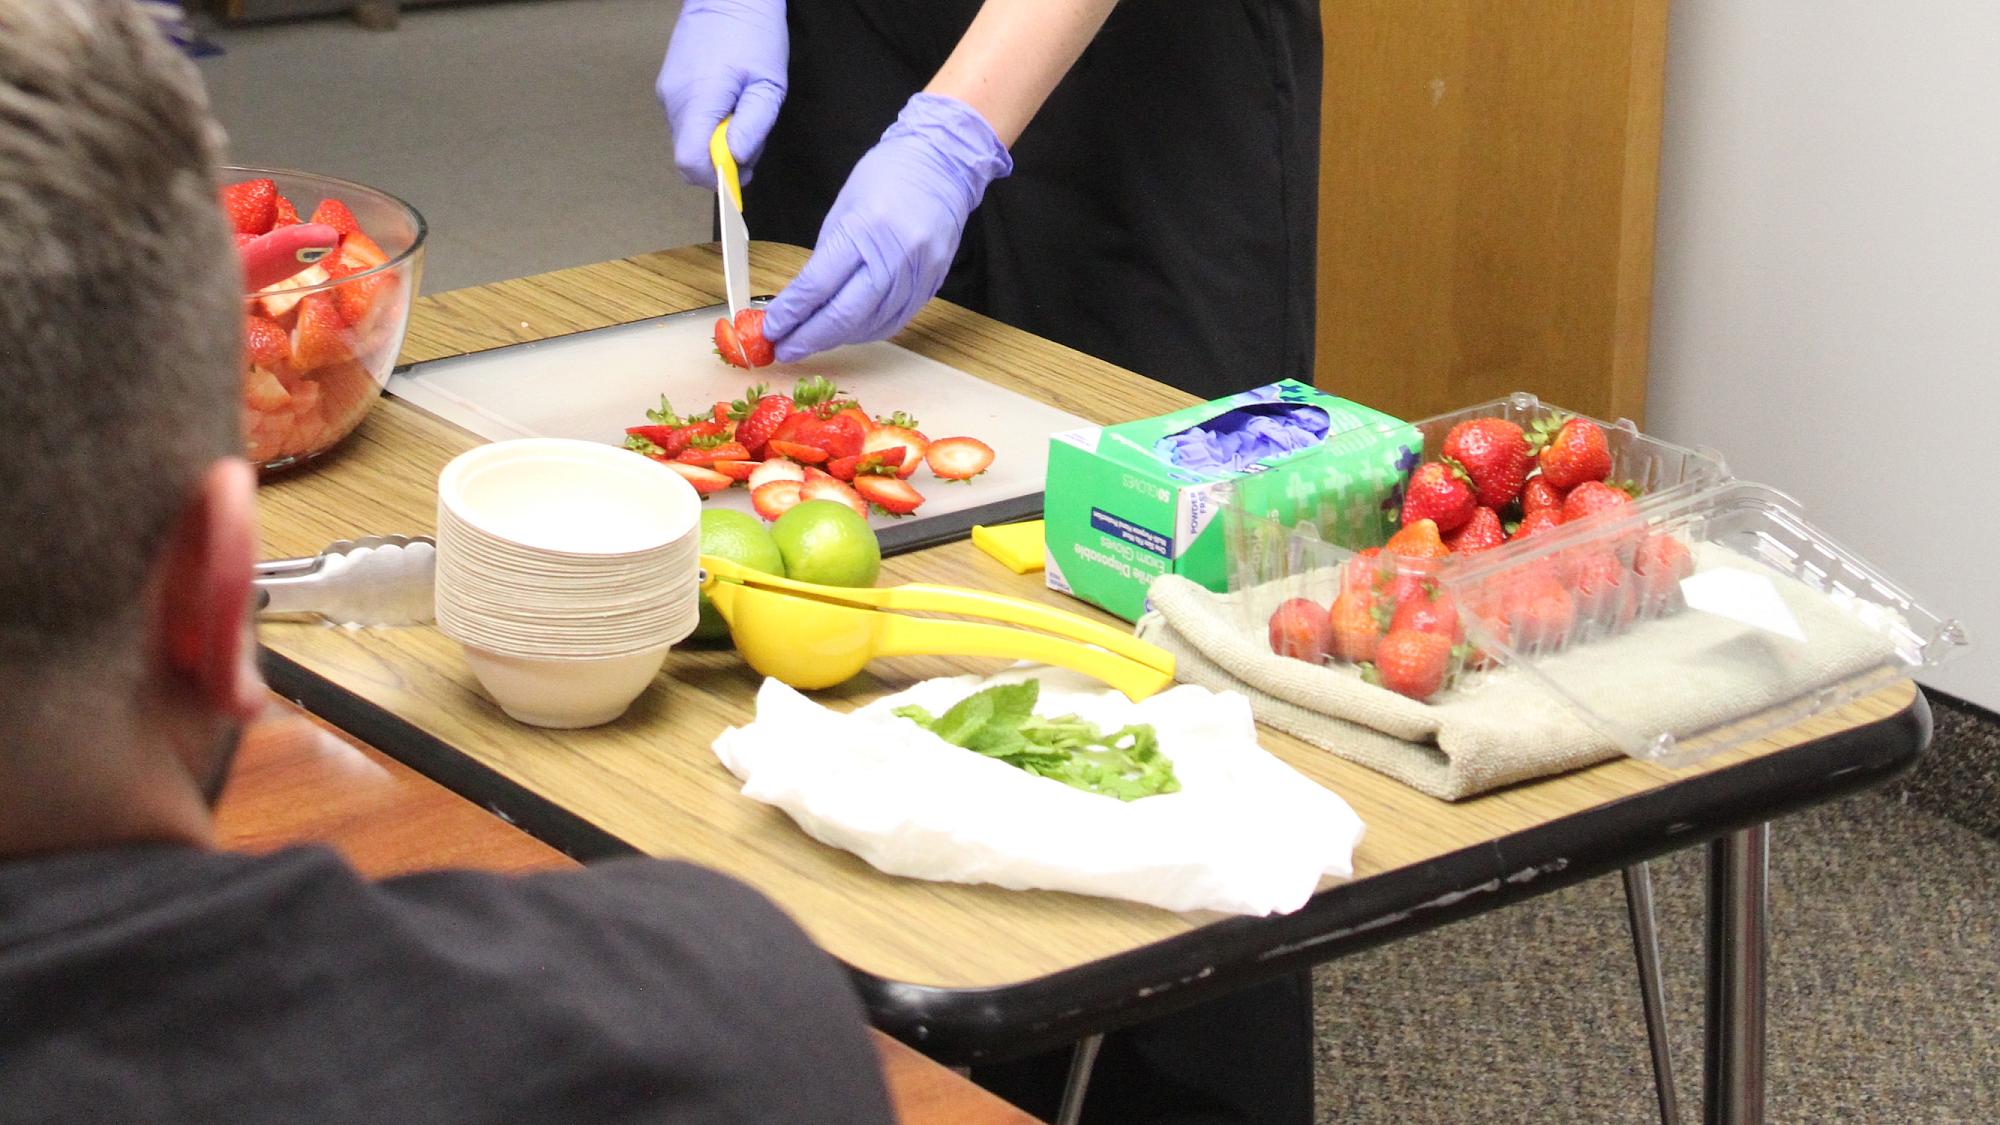 Madeleine French prepares a strawberry-citrus salad during a Journey to Health cooking demonstration.